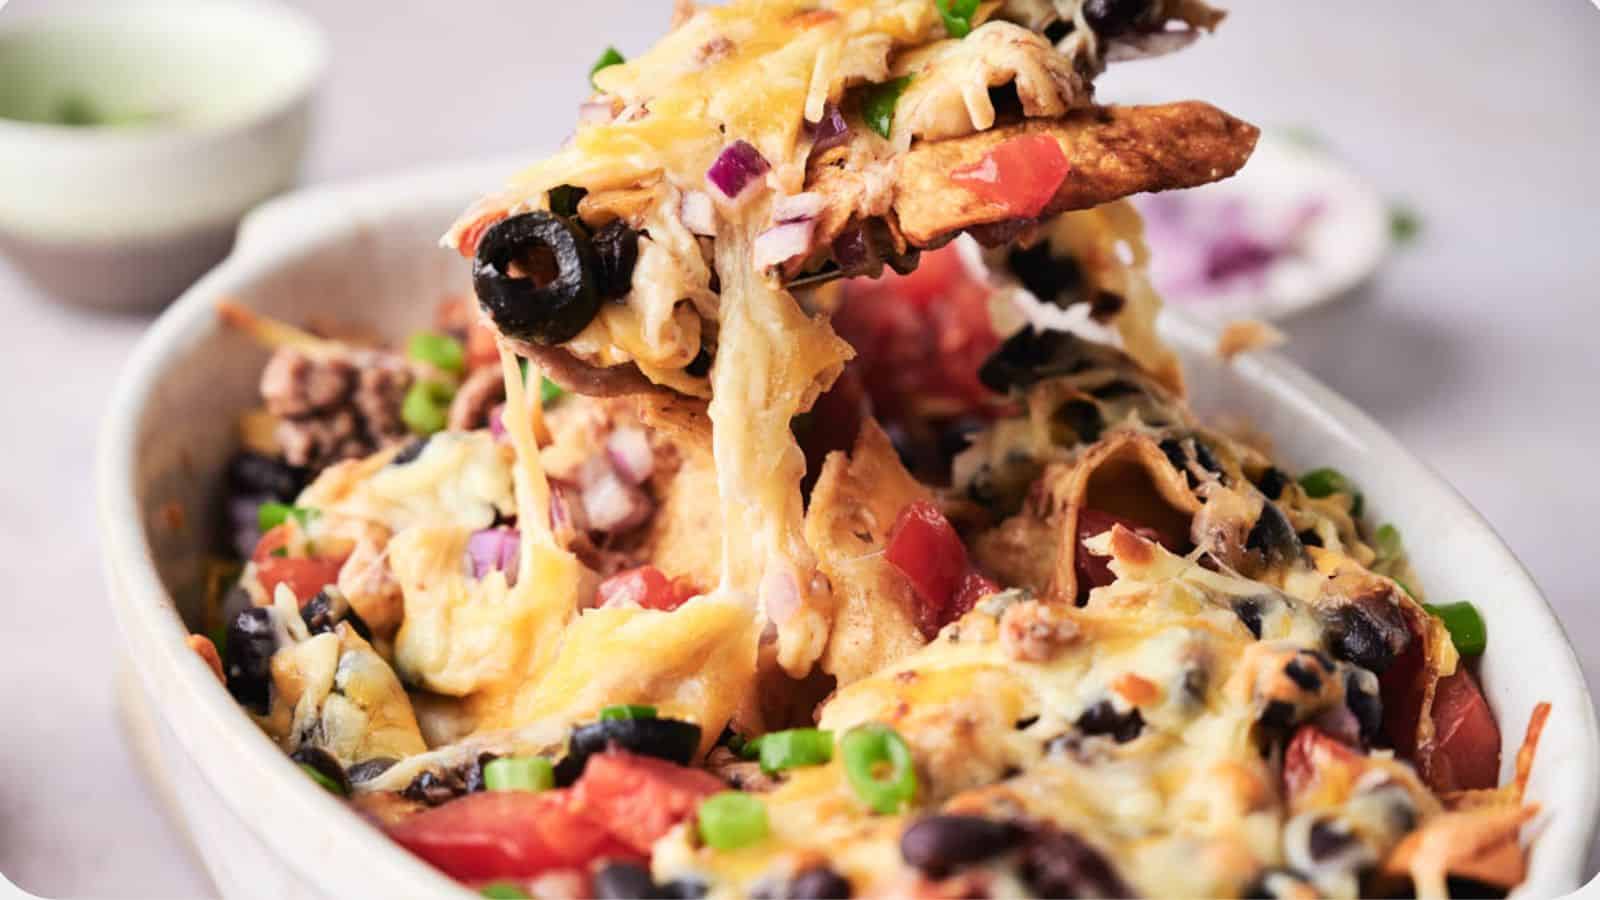 A bowl of taco casserole topped with melted cheese, black olives, tomatoes, and green onions, with a creamy dip in the background.